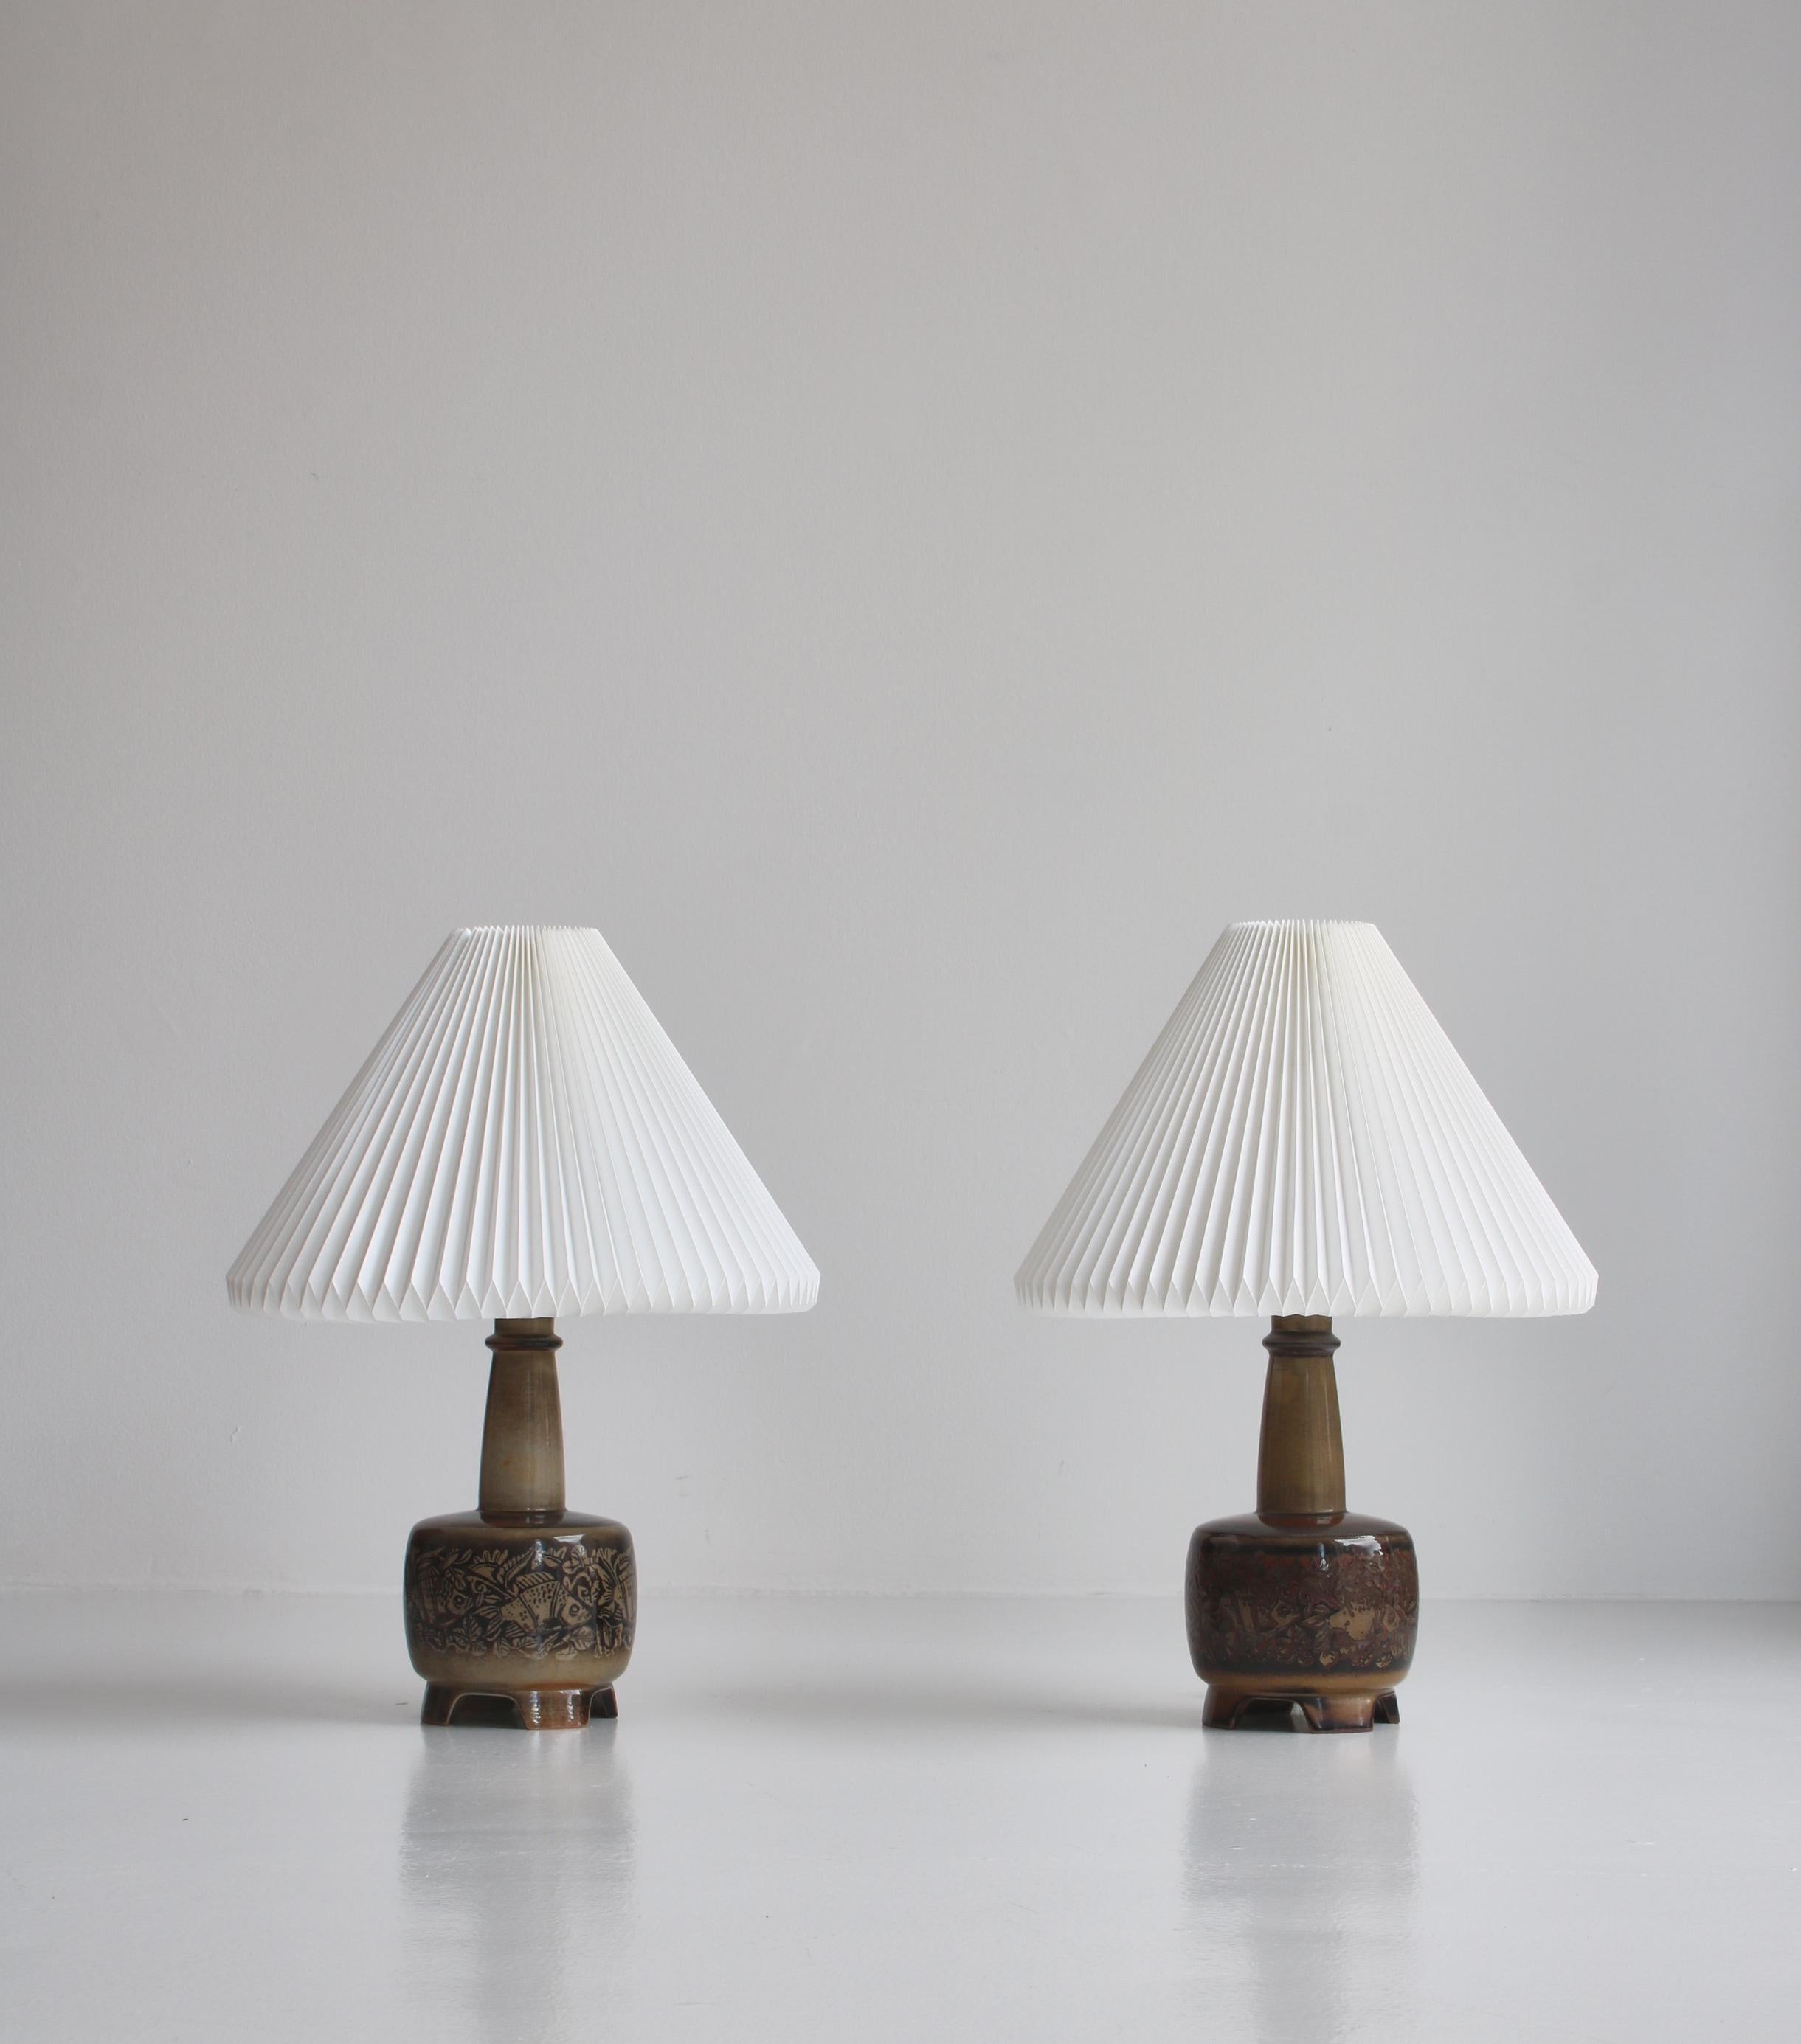 Danish Stoneware Table Lamps by Nils Thorsson for Royal Copenhagen with Le Klint Shades